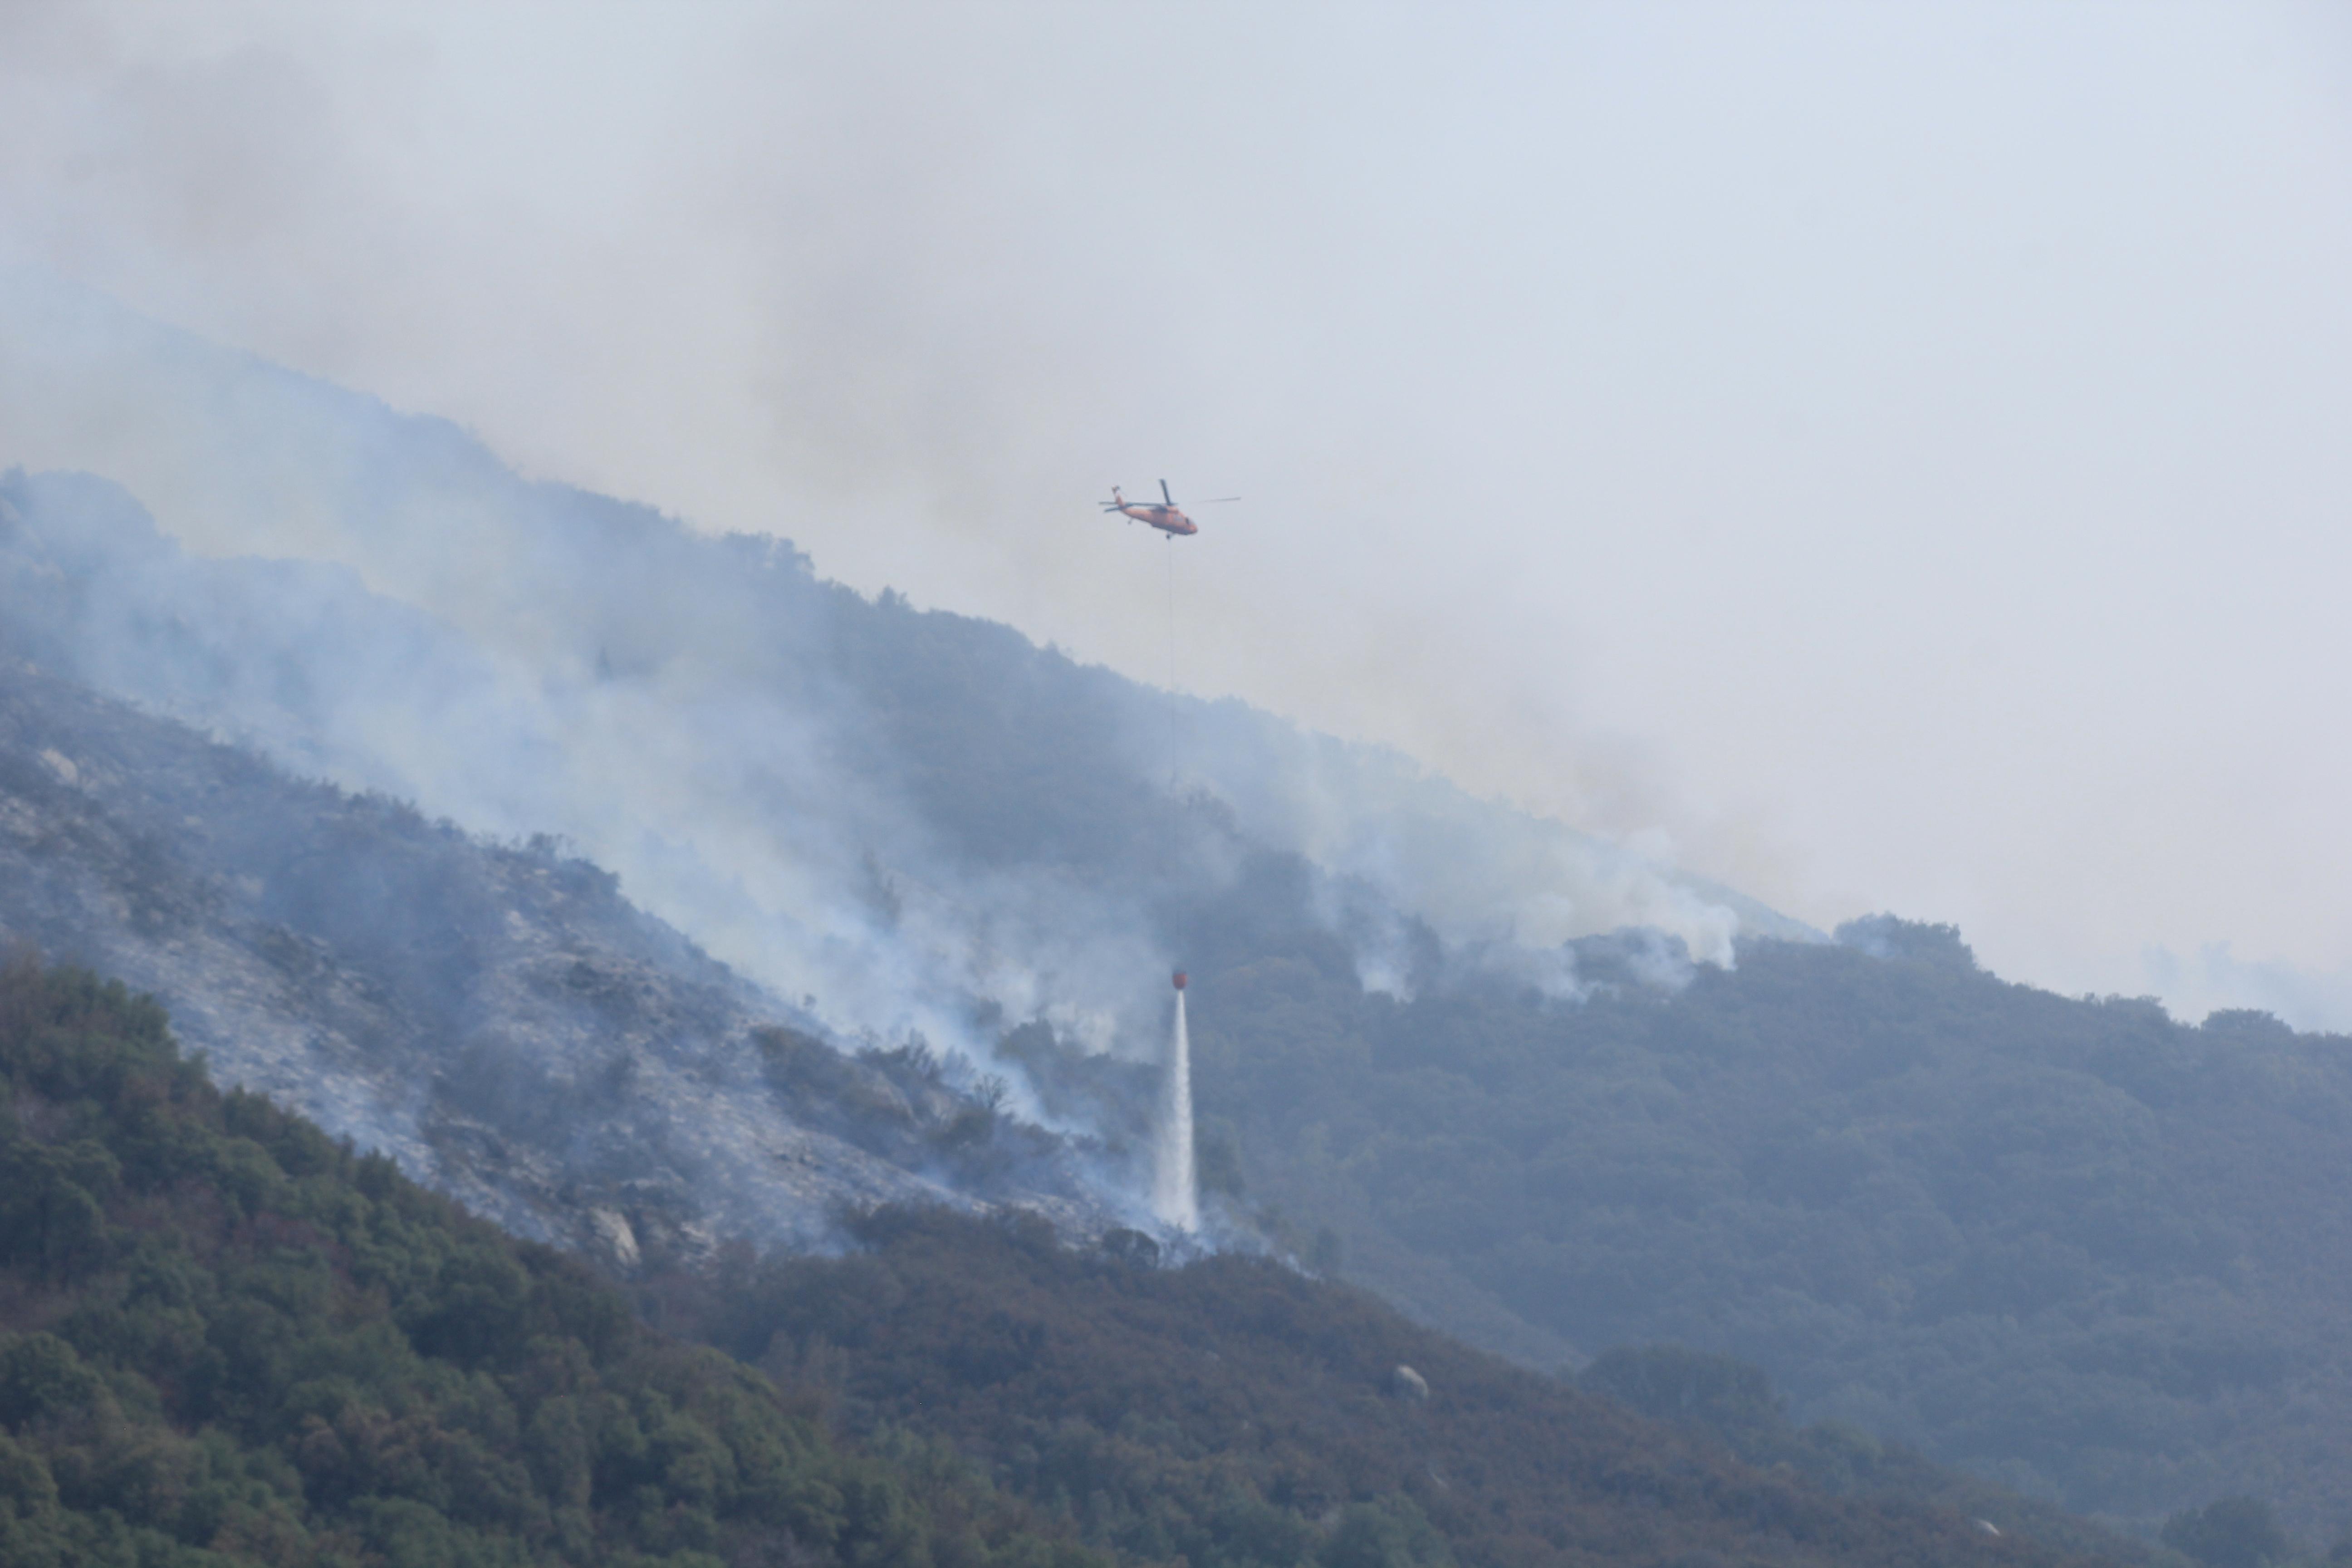 An orange Blackhawk helicopter drops water on Paradise ridge where fire behavior increased when the inversion lifted yesterday